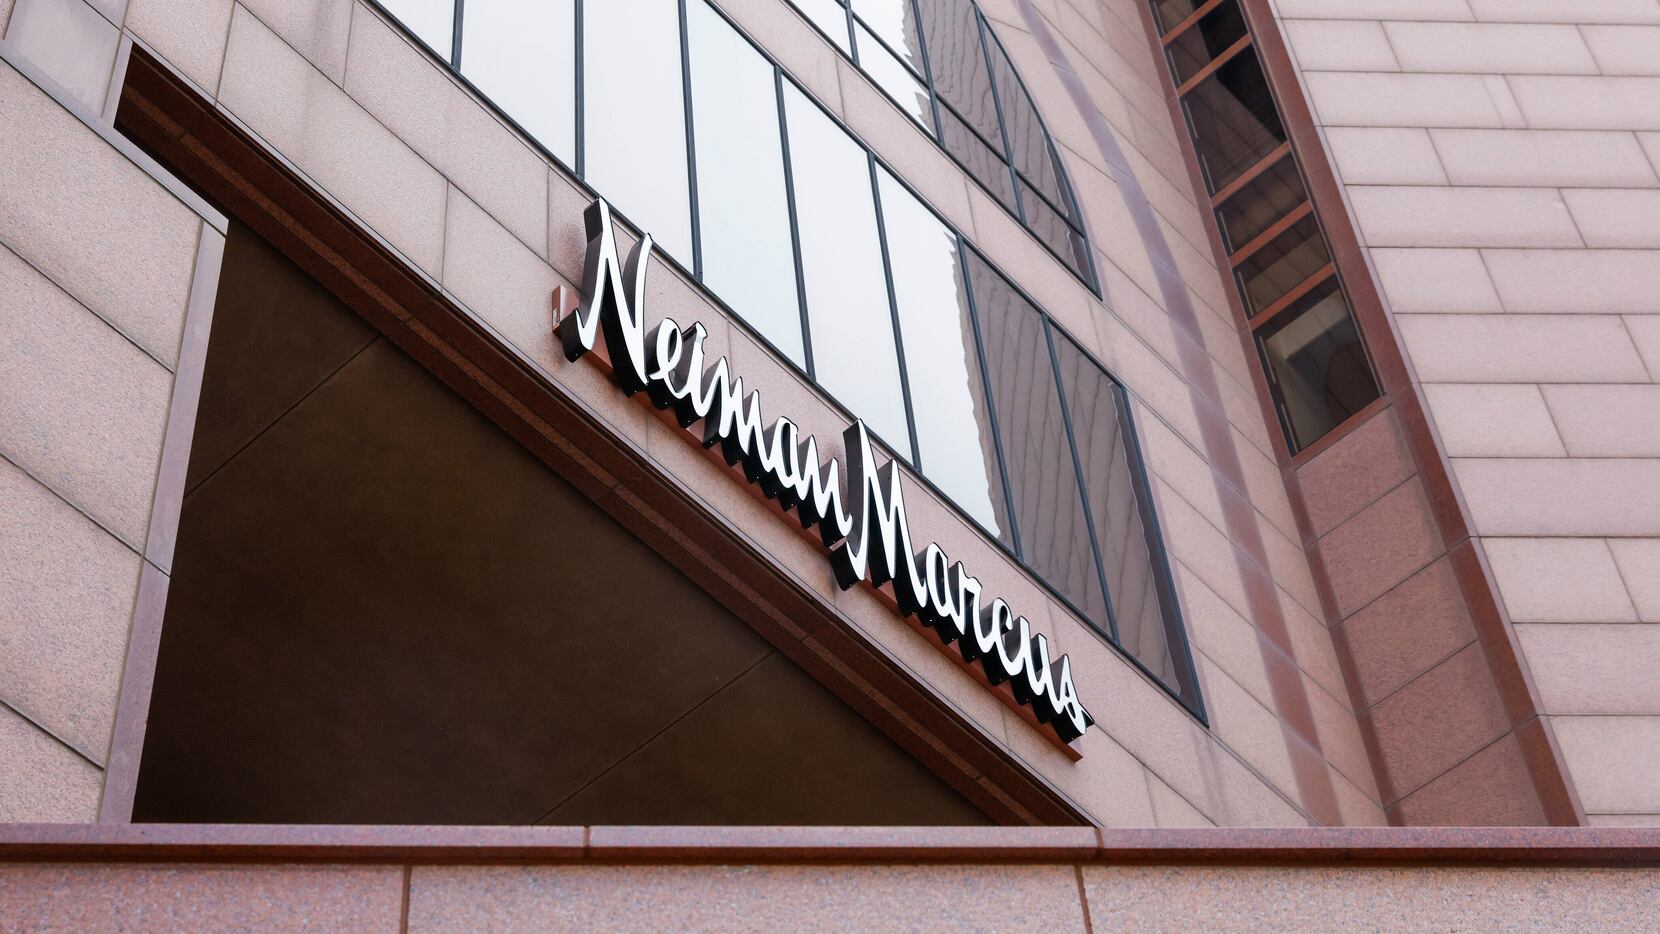 More than 1,000 jobs part of the deal as Neiman Marcus eyes Cityplace move  with city's blessing - Dallas Business Journal